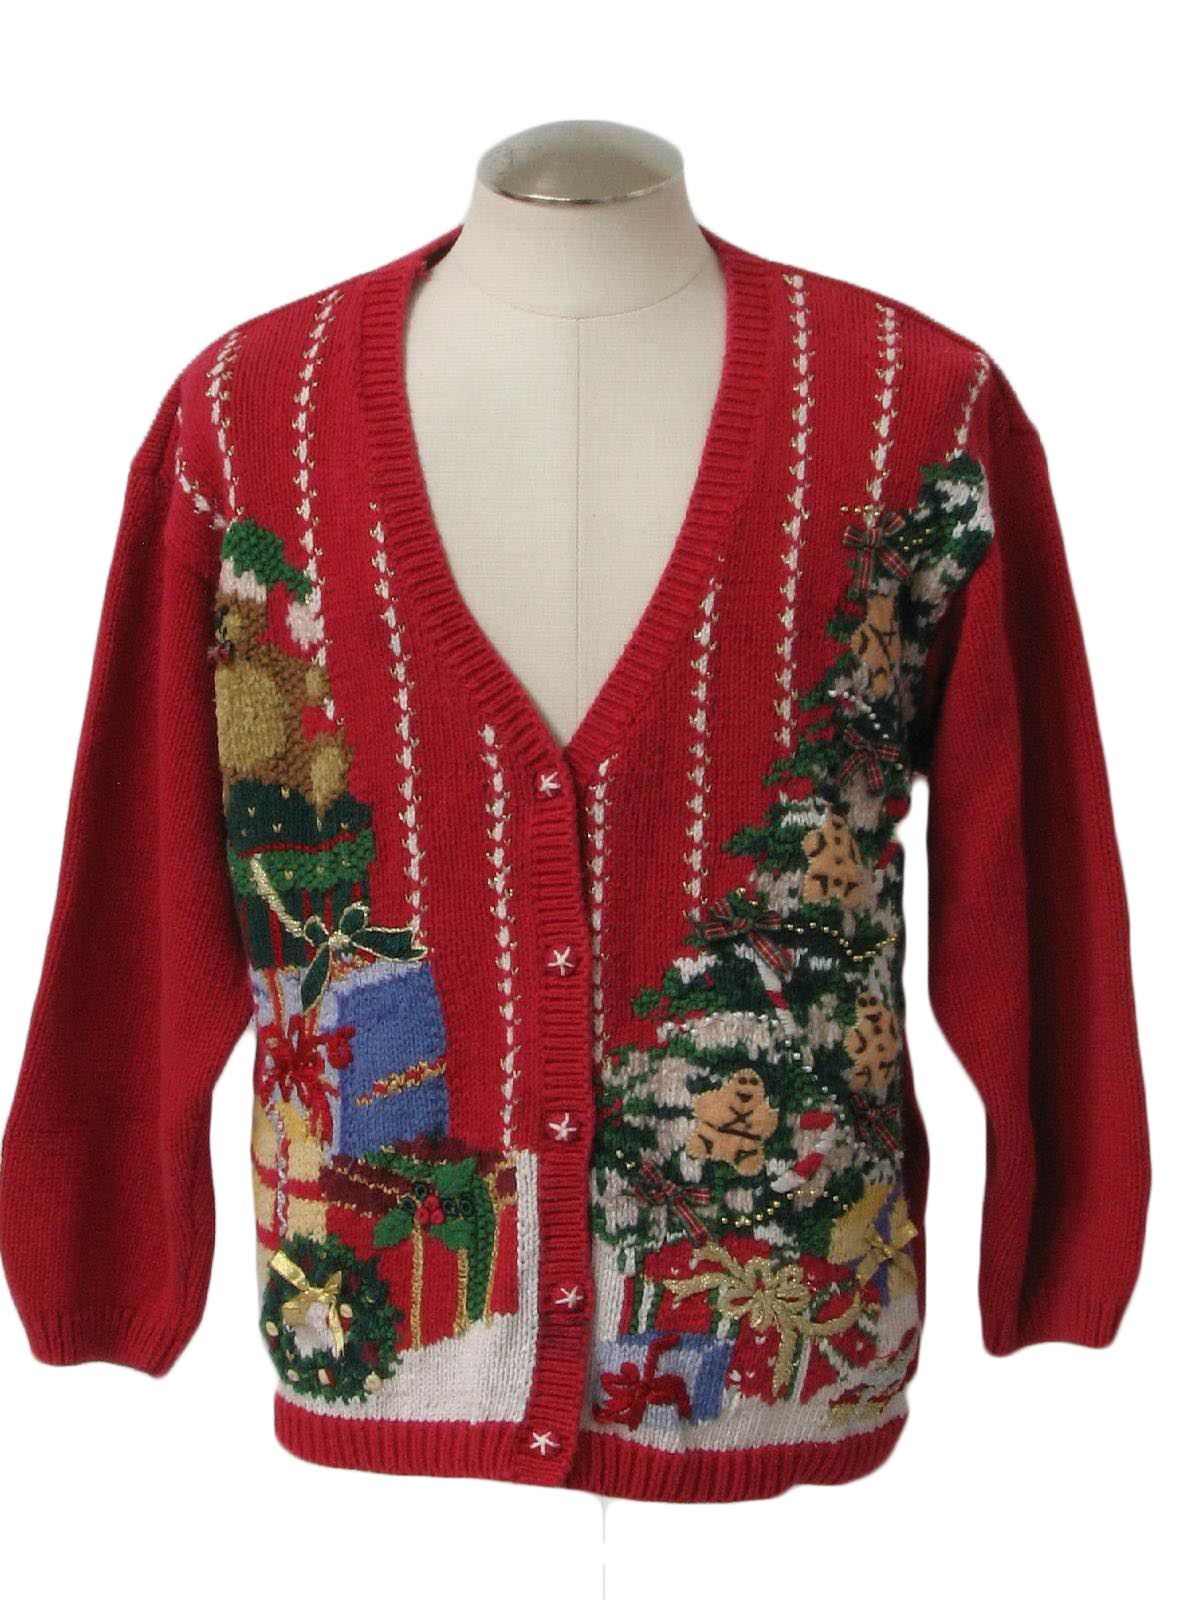 Ugly Christmas Cardigan Sweater: -Tiara- Unisex red background, blended ...